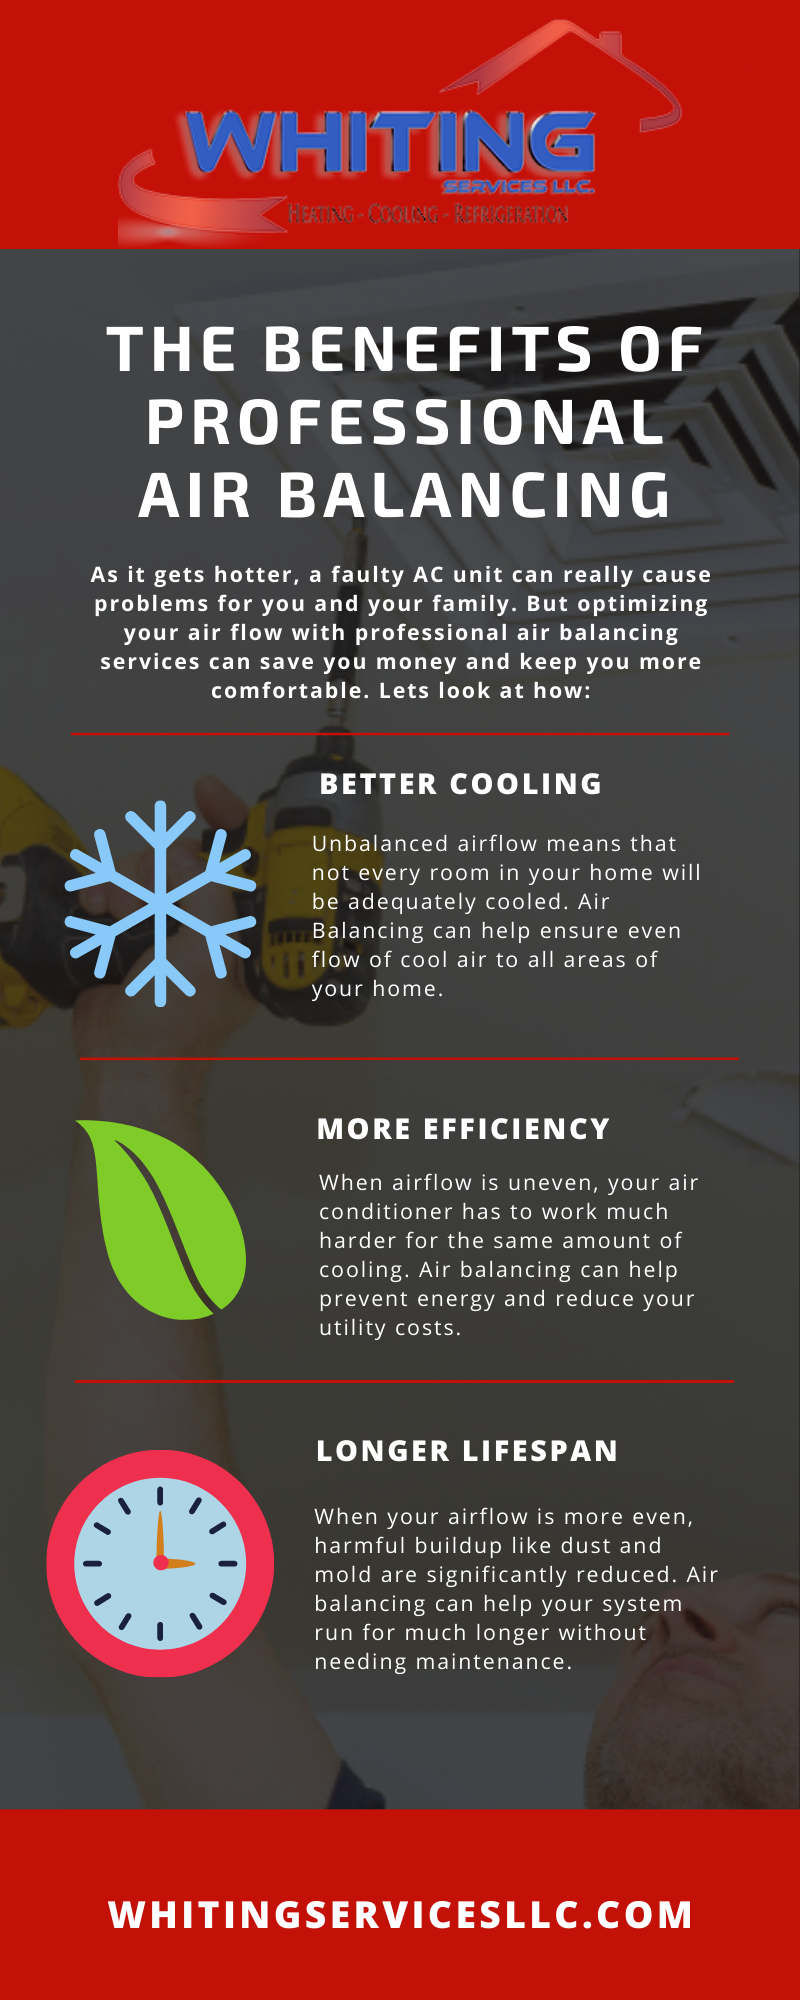 An infographic explaining the benefits of air balancing